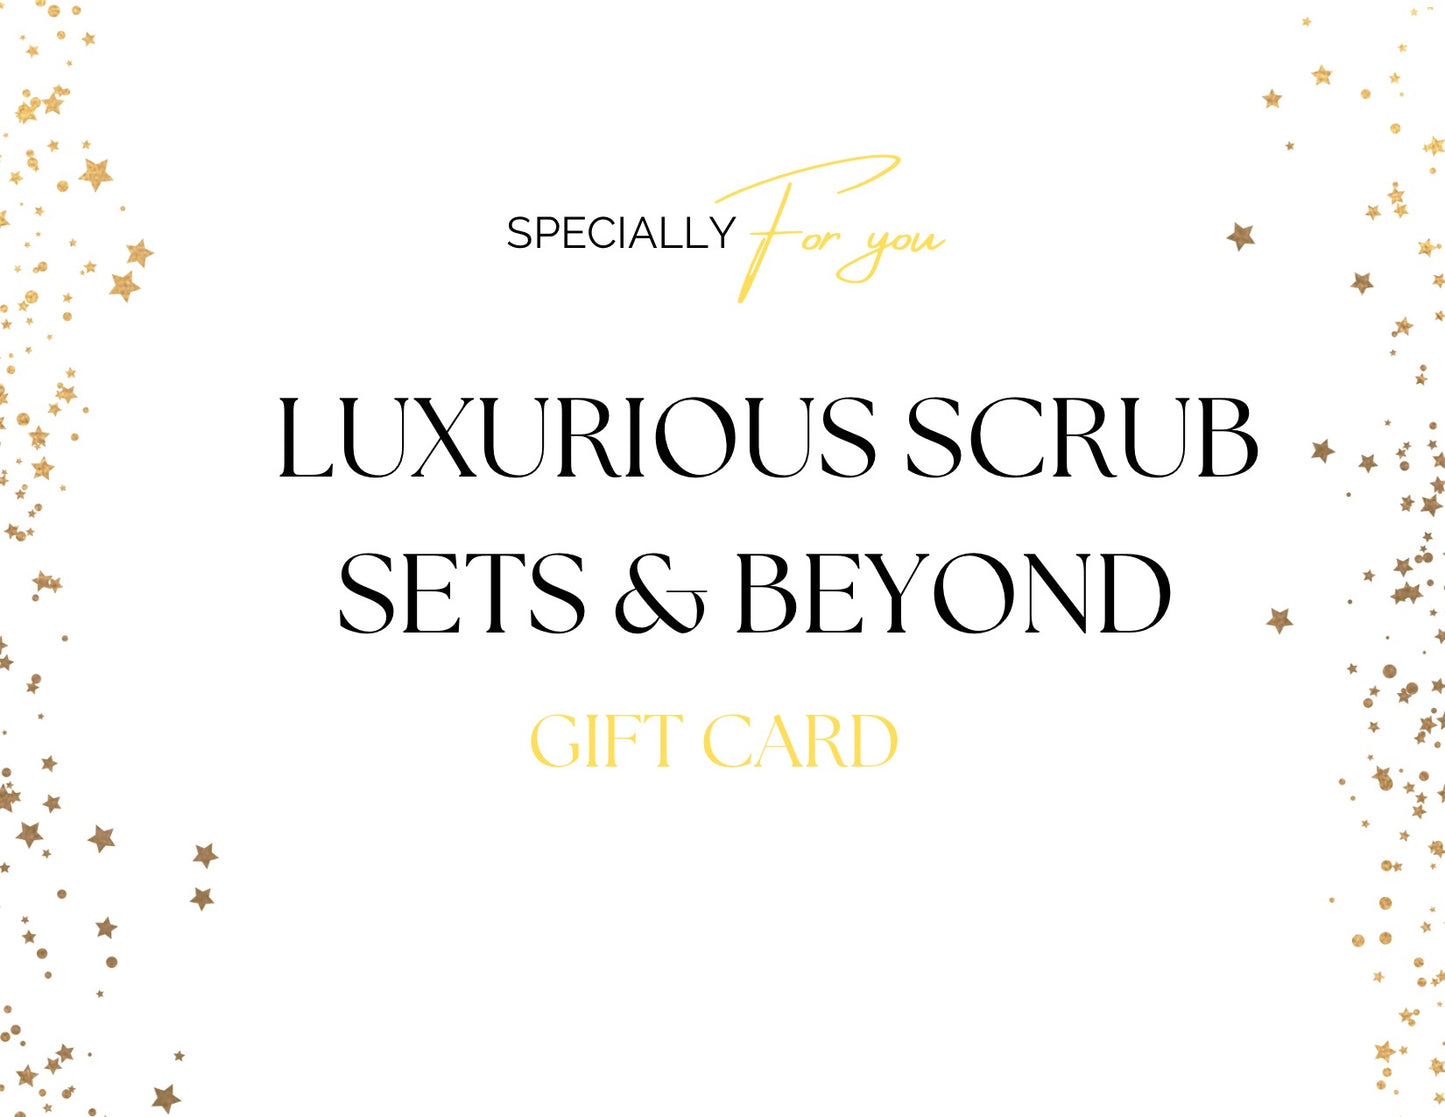 Luxurious Scrub Sets and Beyond Gift Card